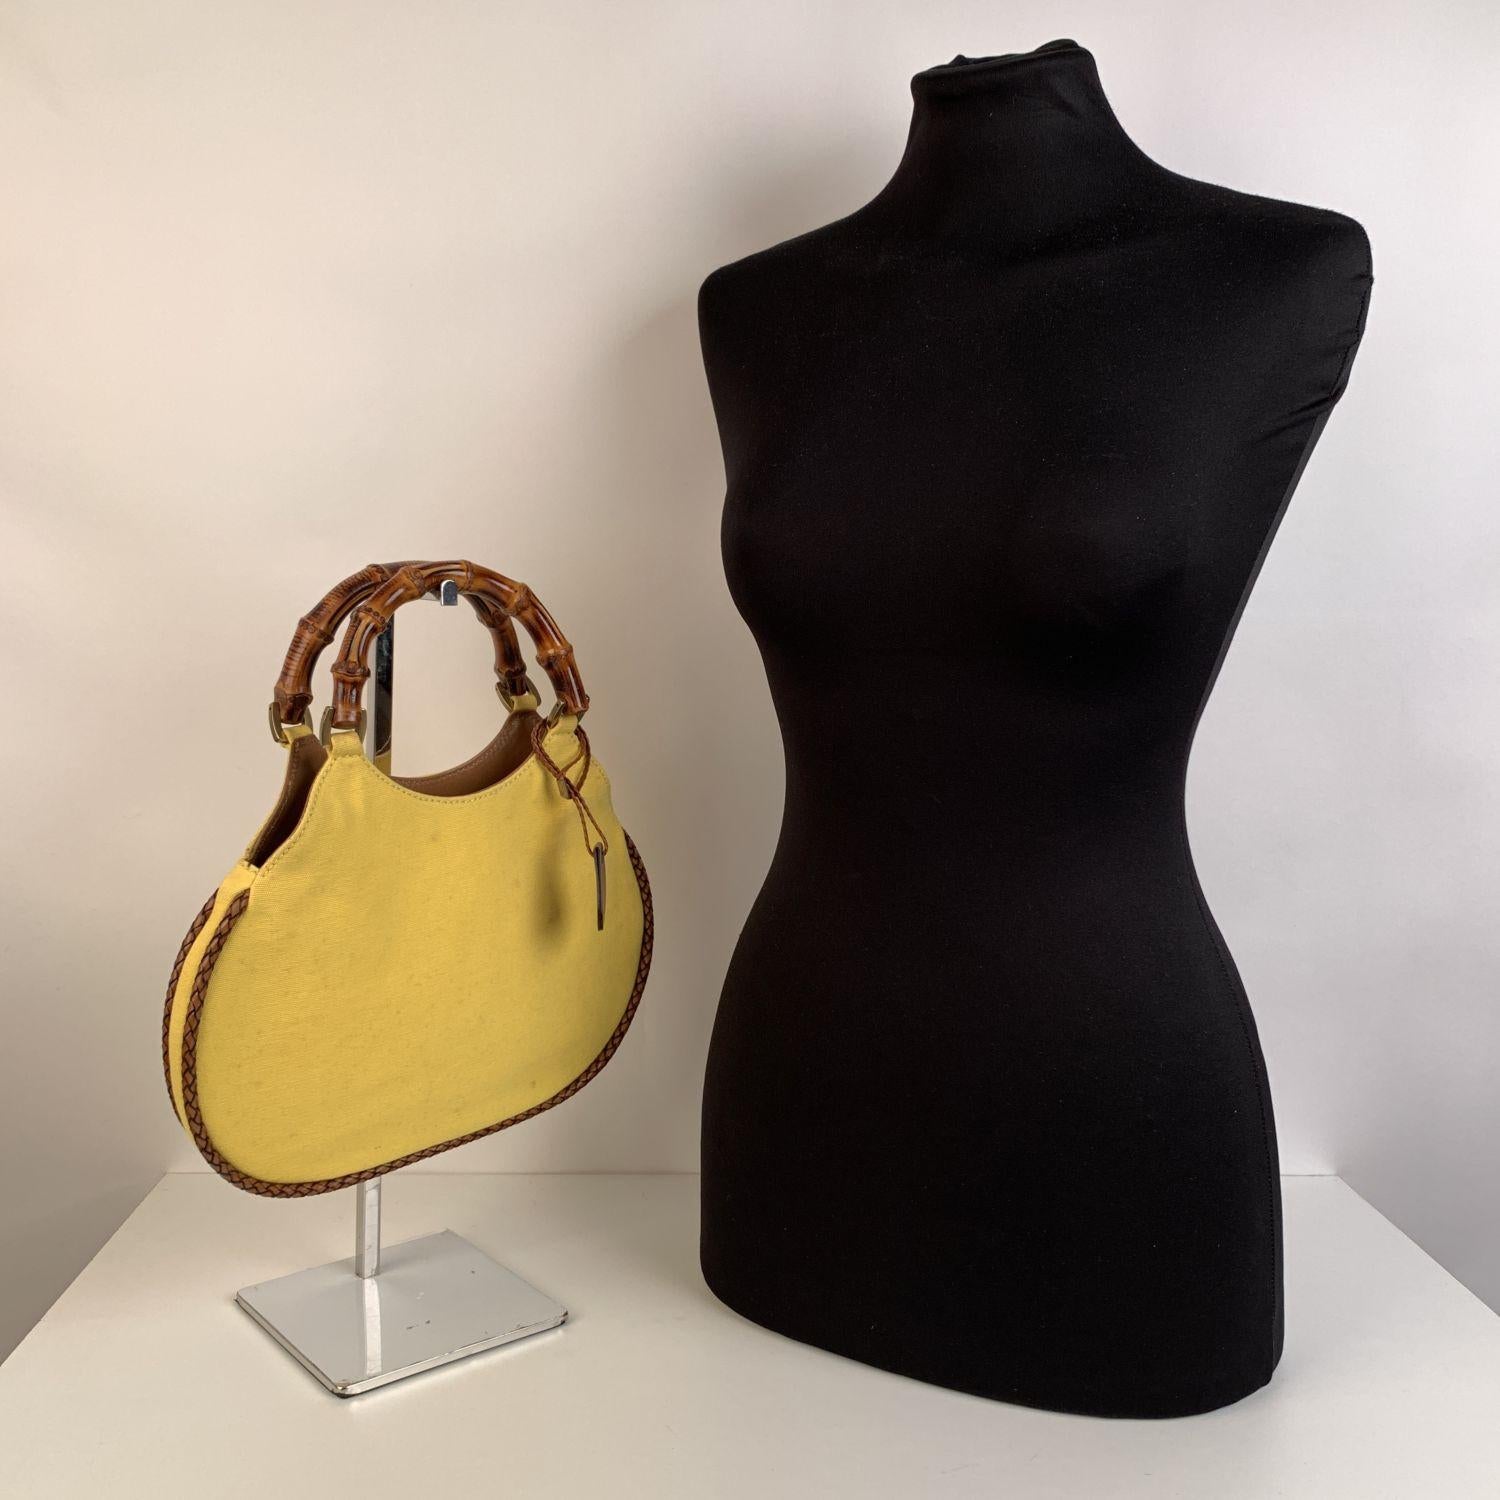 Beautiful Gucci small Bamboo tote bag. Crafted in yellow canvas with genuine leather braided trim. Double distinctive Bamboo handles.Open top. 1 side zip pocket inside. 'Gucci - Made in Italy' tag inside (serial number on its